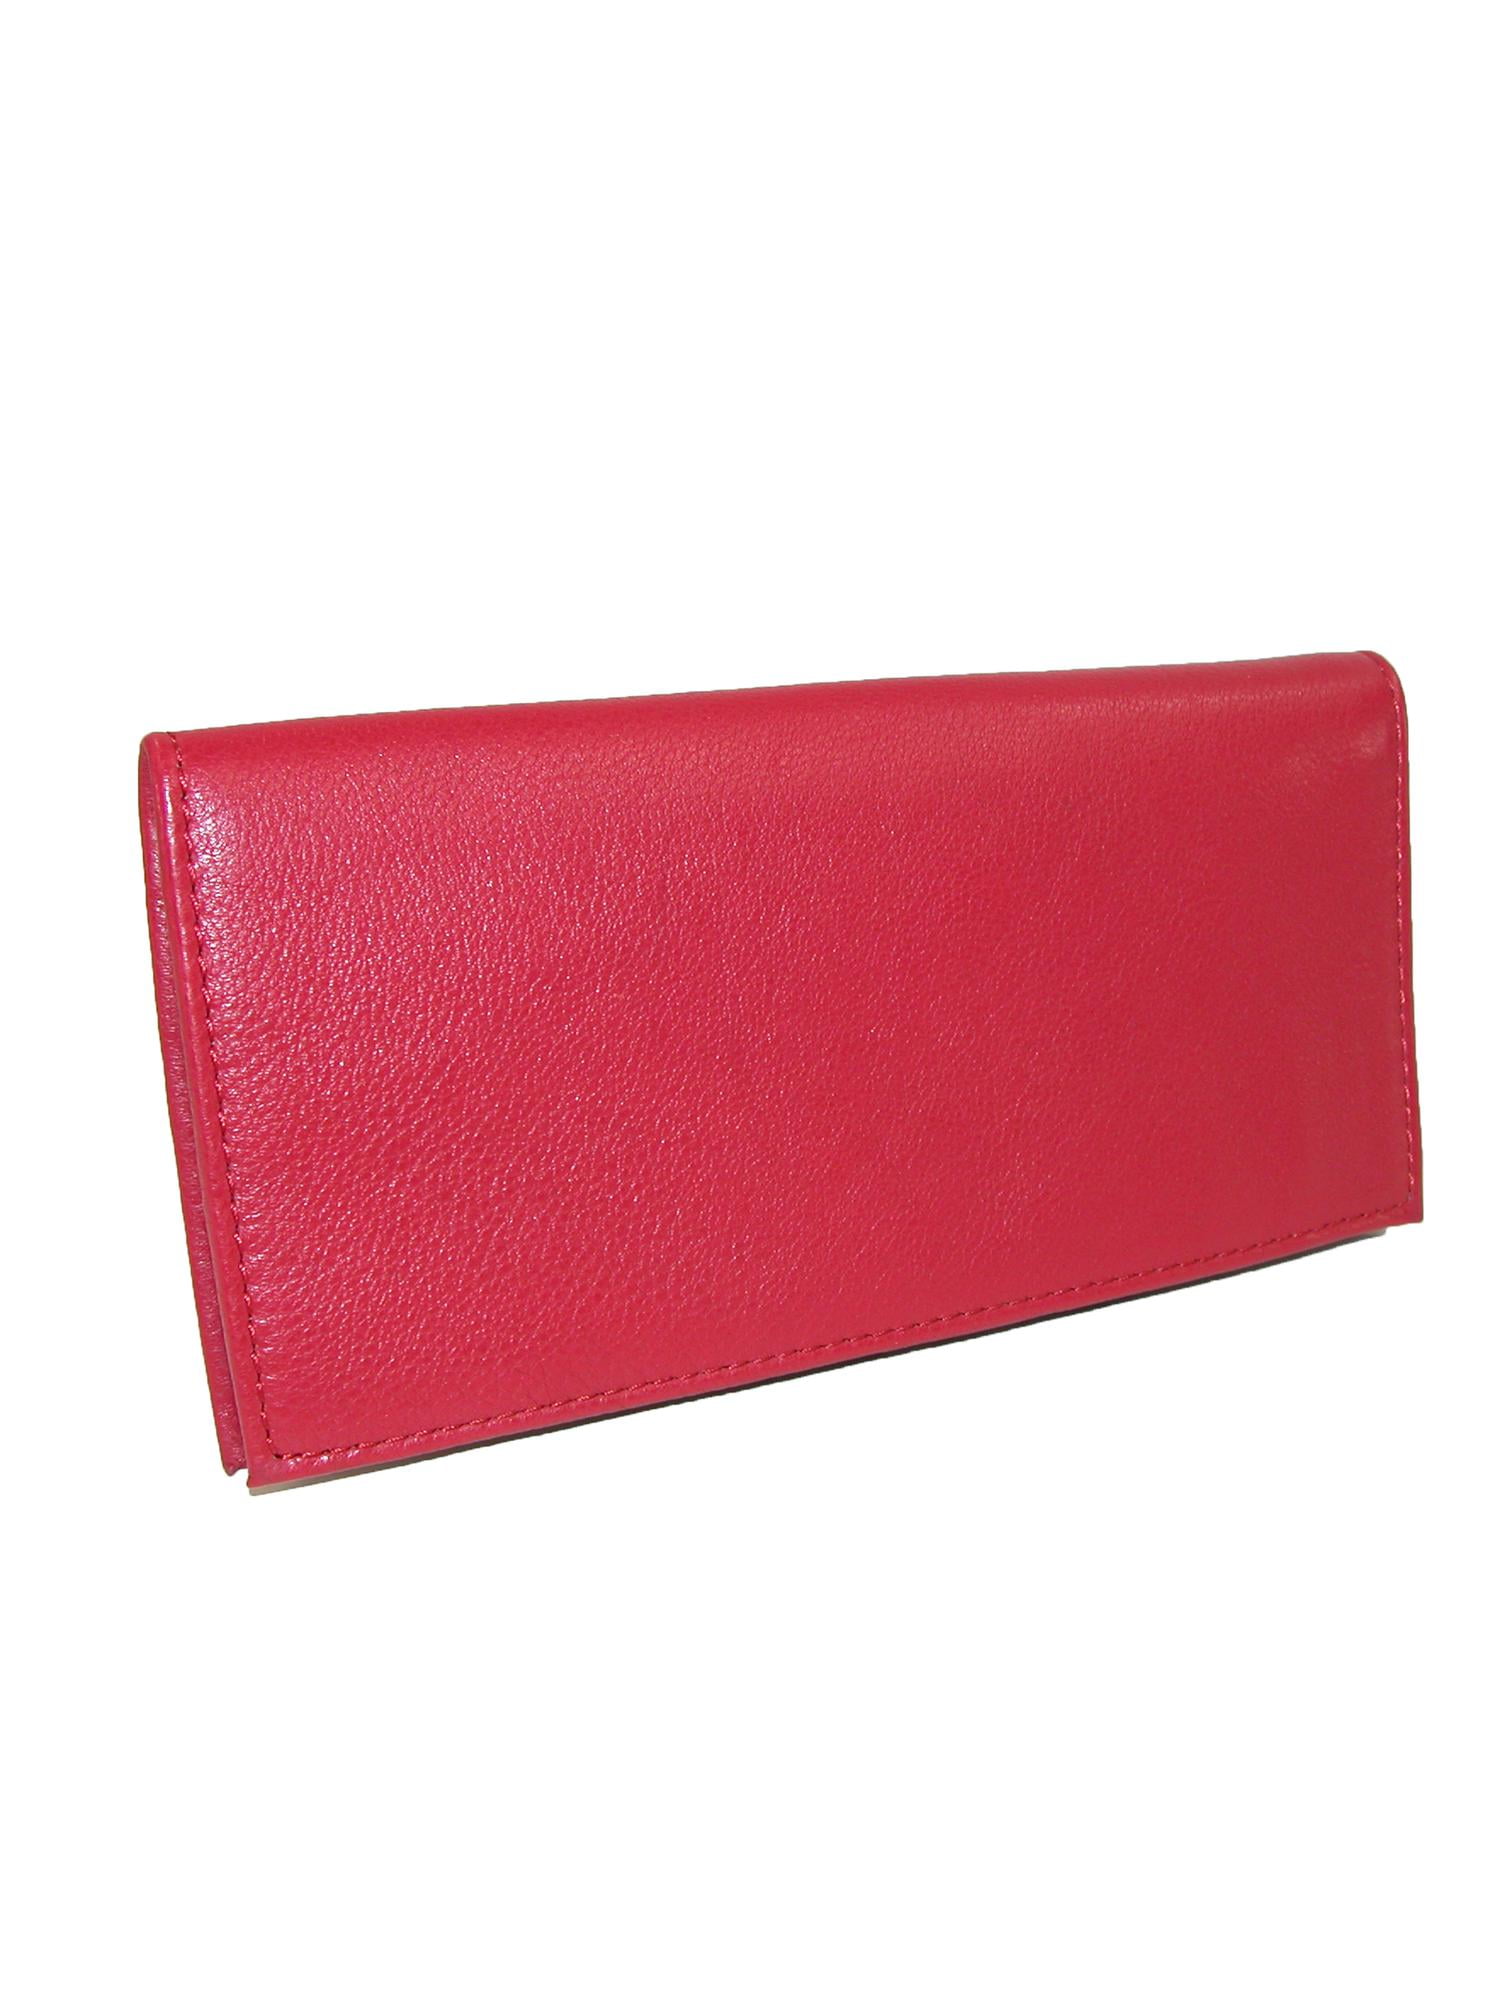 Paul & Taylor Leather Checkbook Cover Wallet - Walmart.com